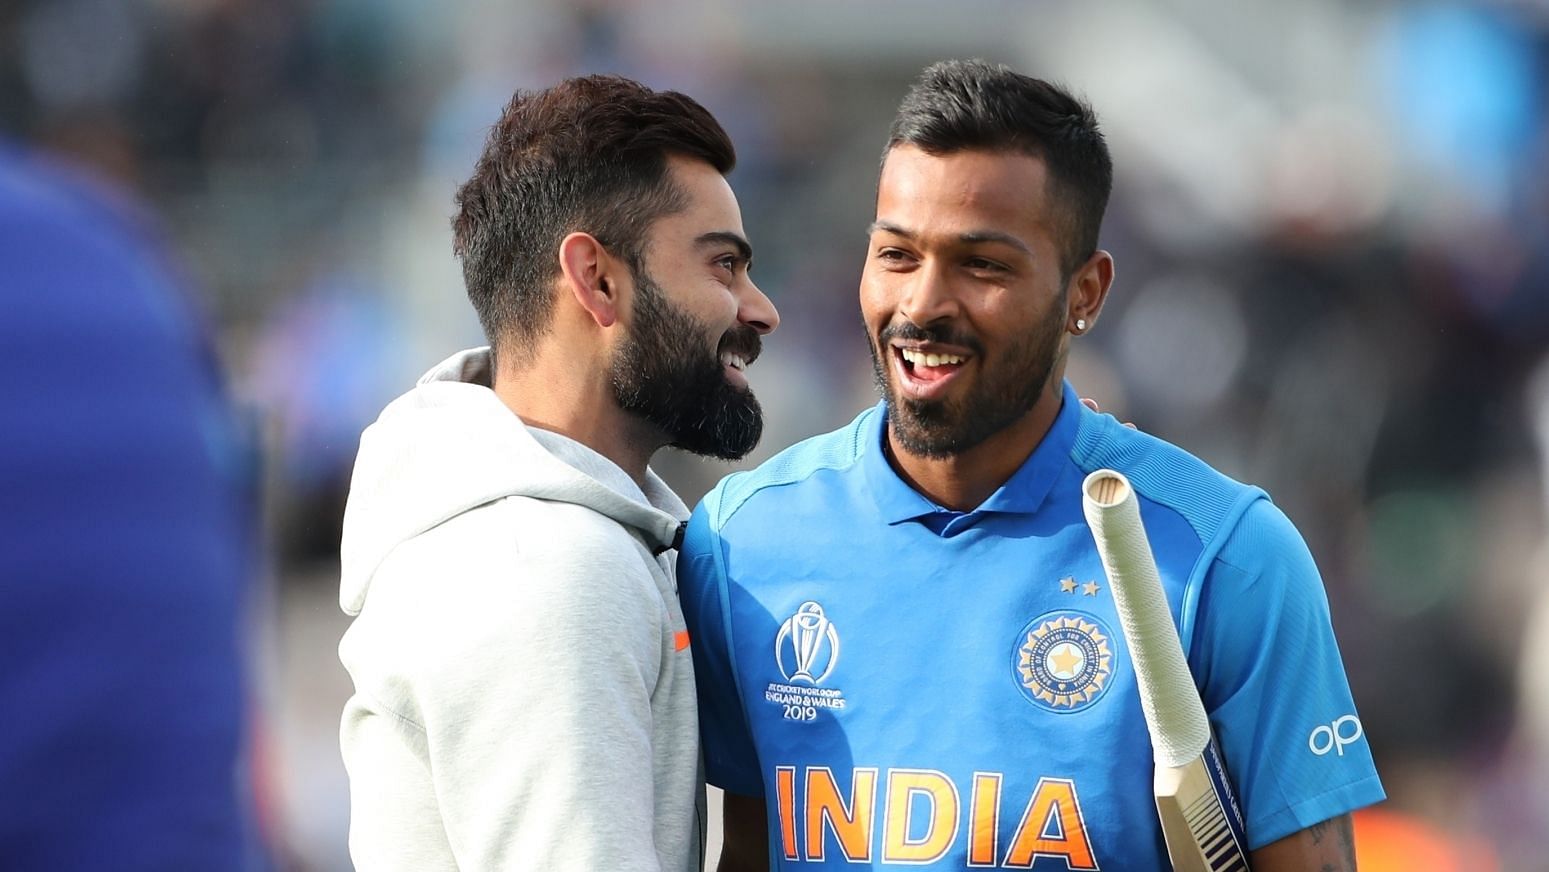 India won their ICC World Cup 2019 campaign opener against South Africa in Souhampton.&nbsp;